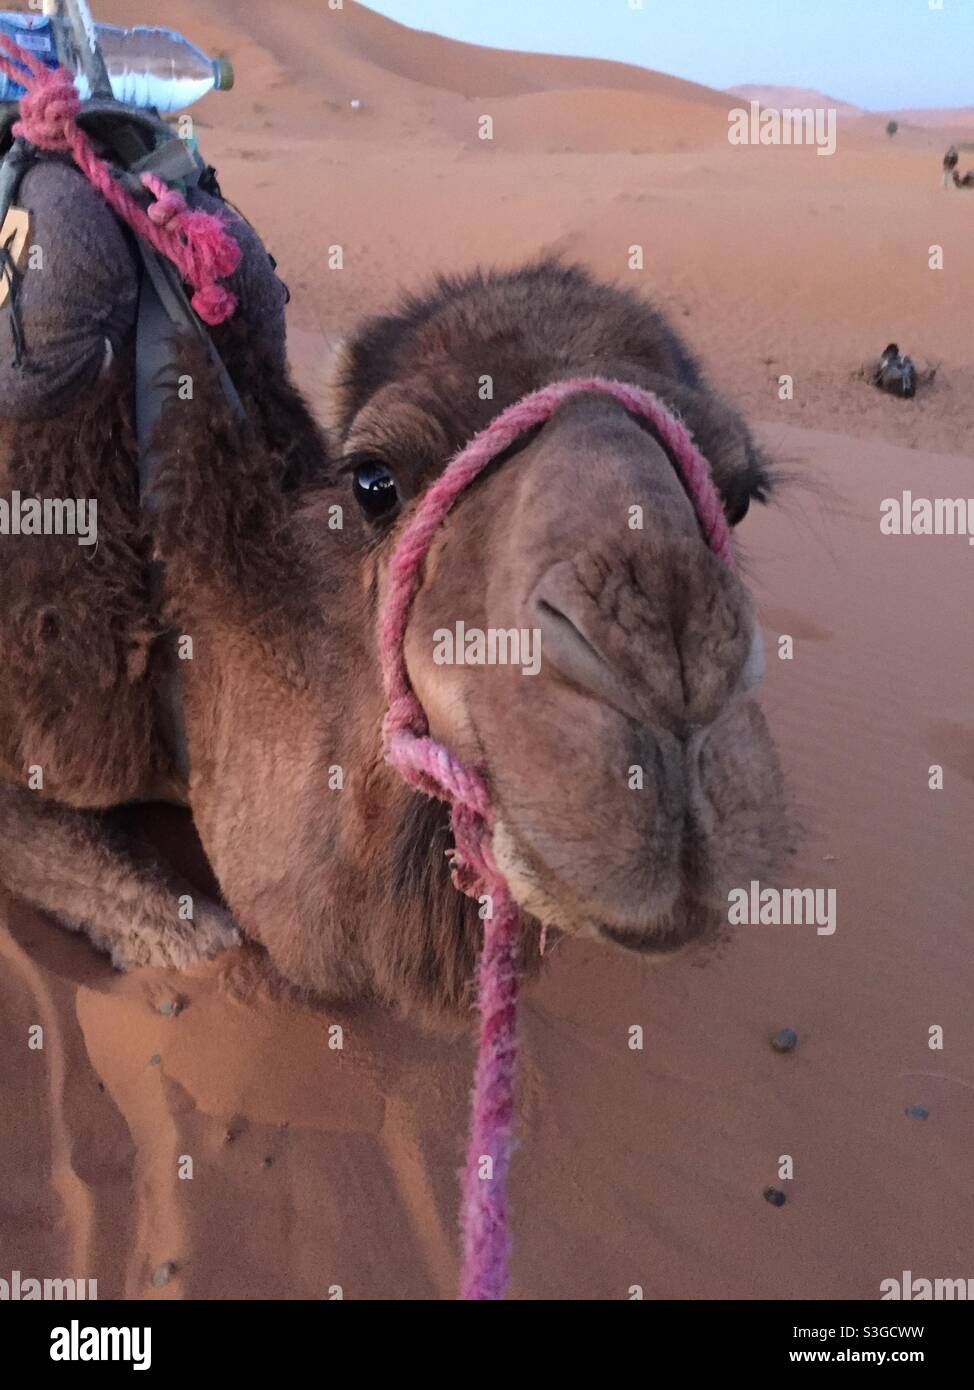 Close up photo of brown camel in Sahara desert, Morocco, Africa Stock Photo